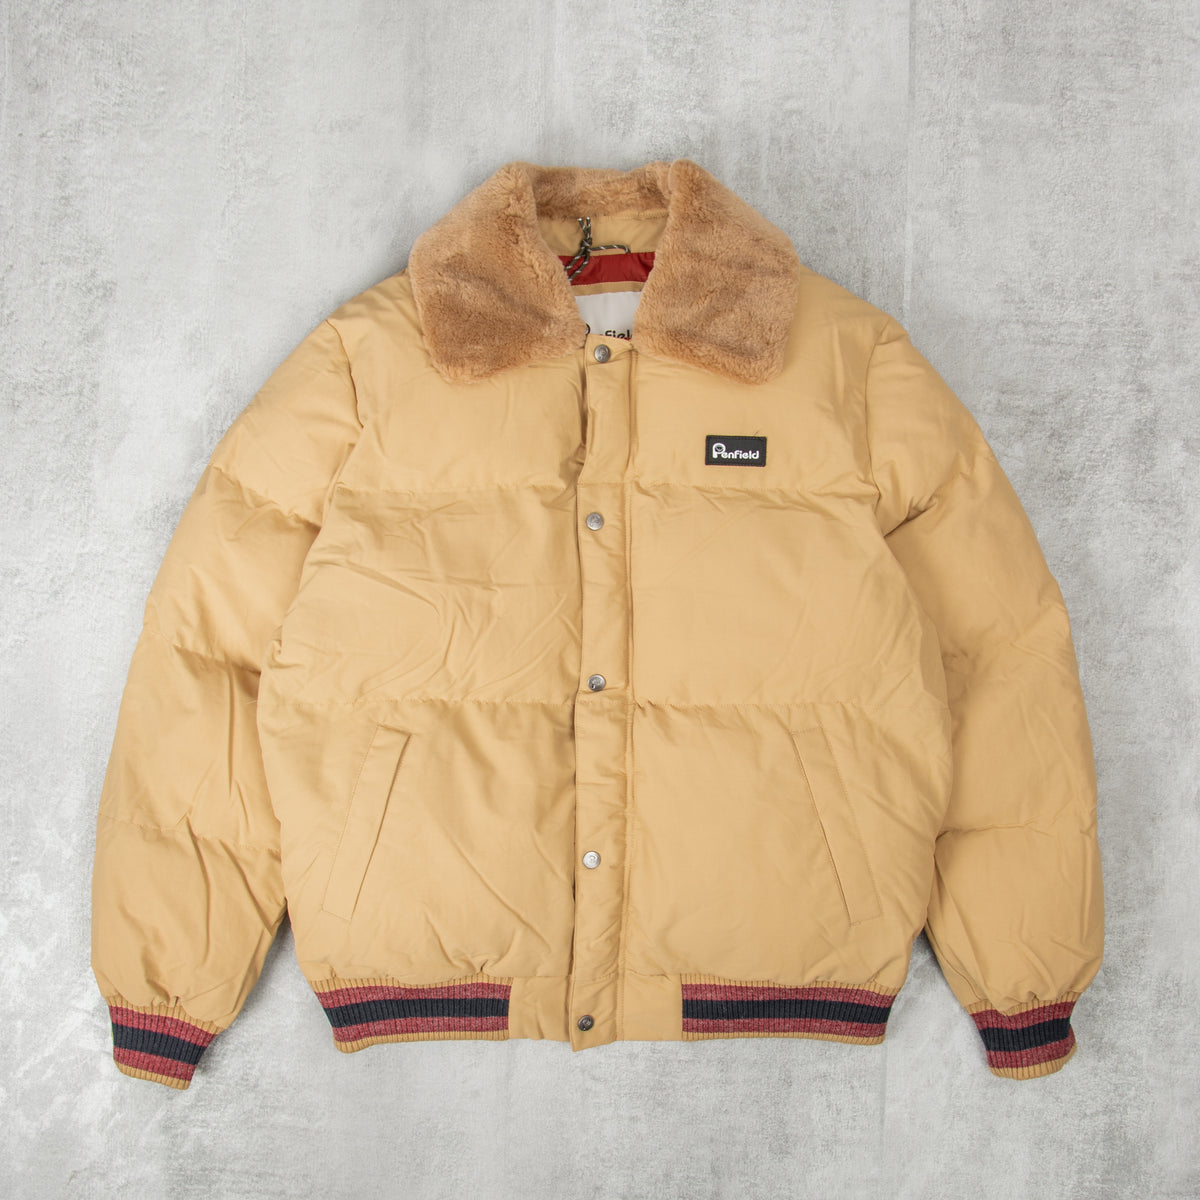 Buy the Penfield Archive Padded Bomber @Union Clothing Union Clothing